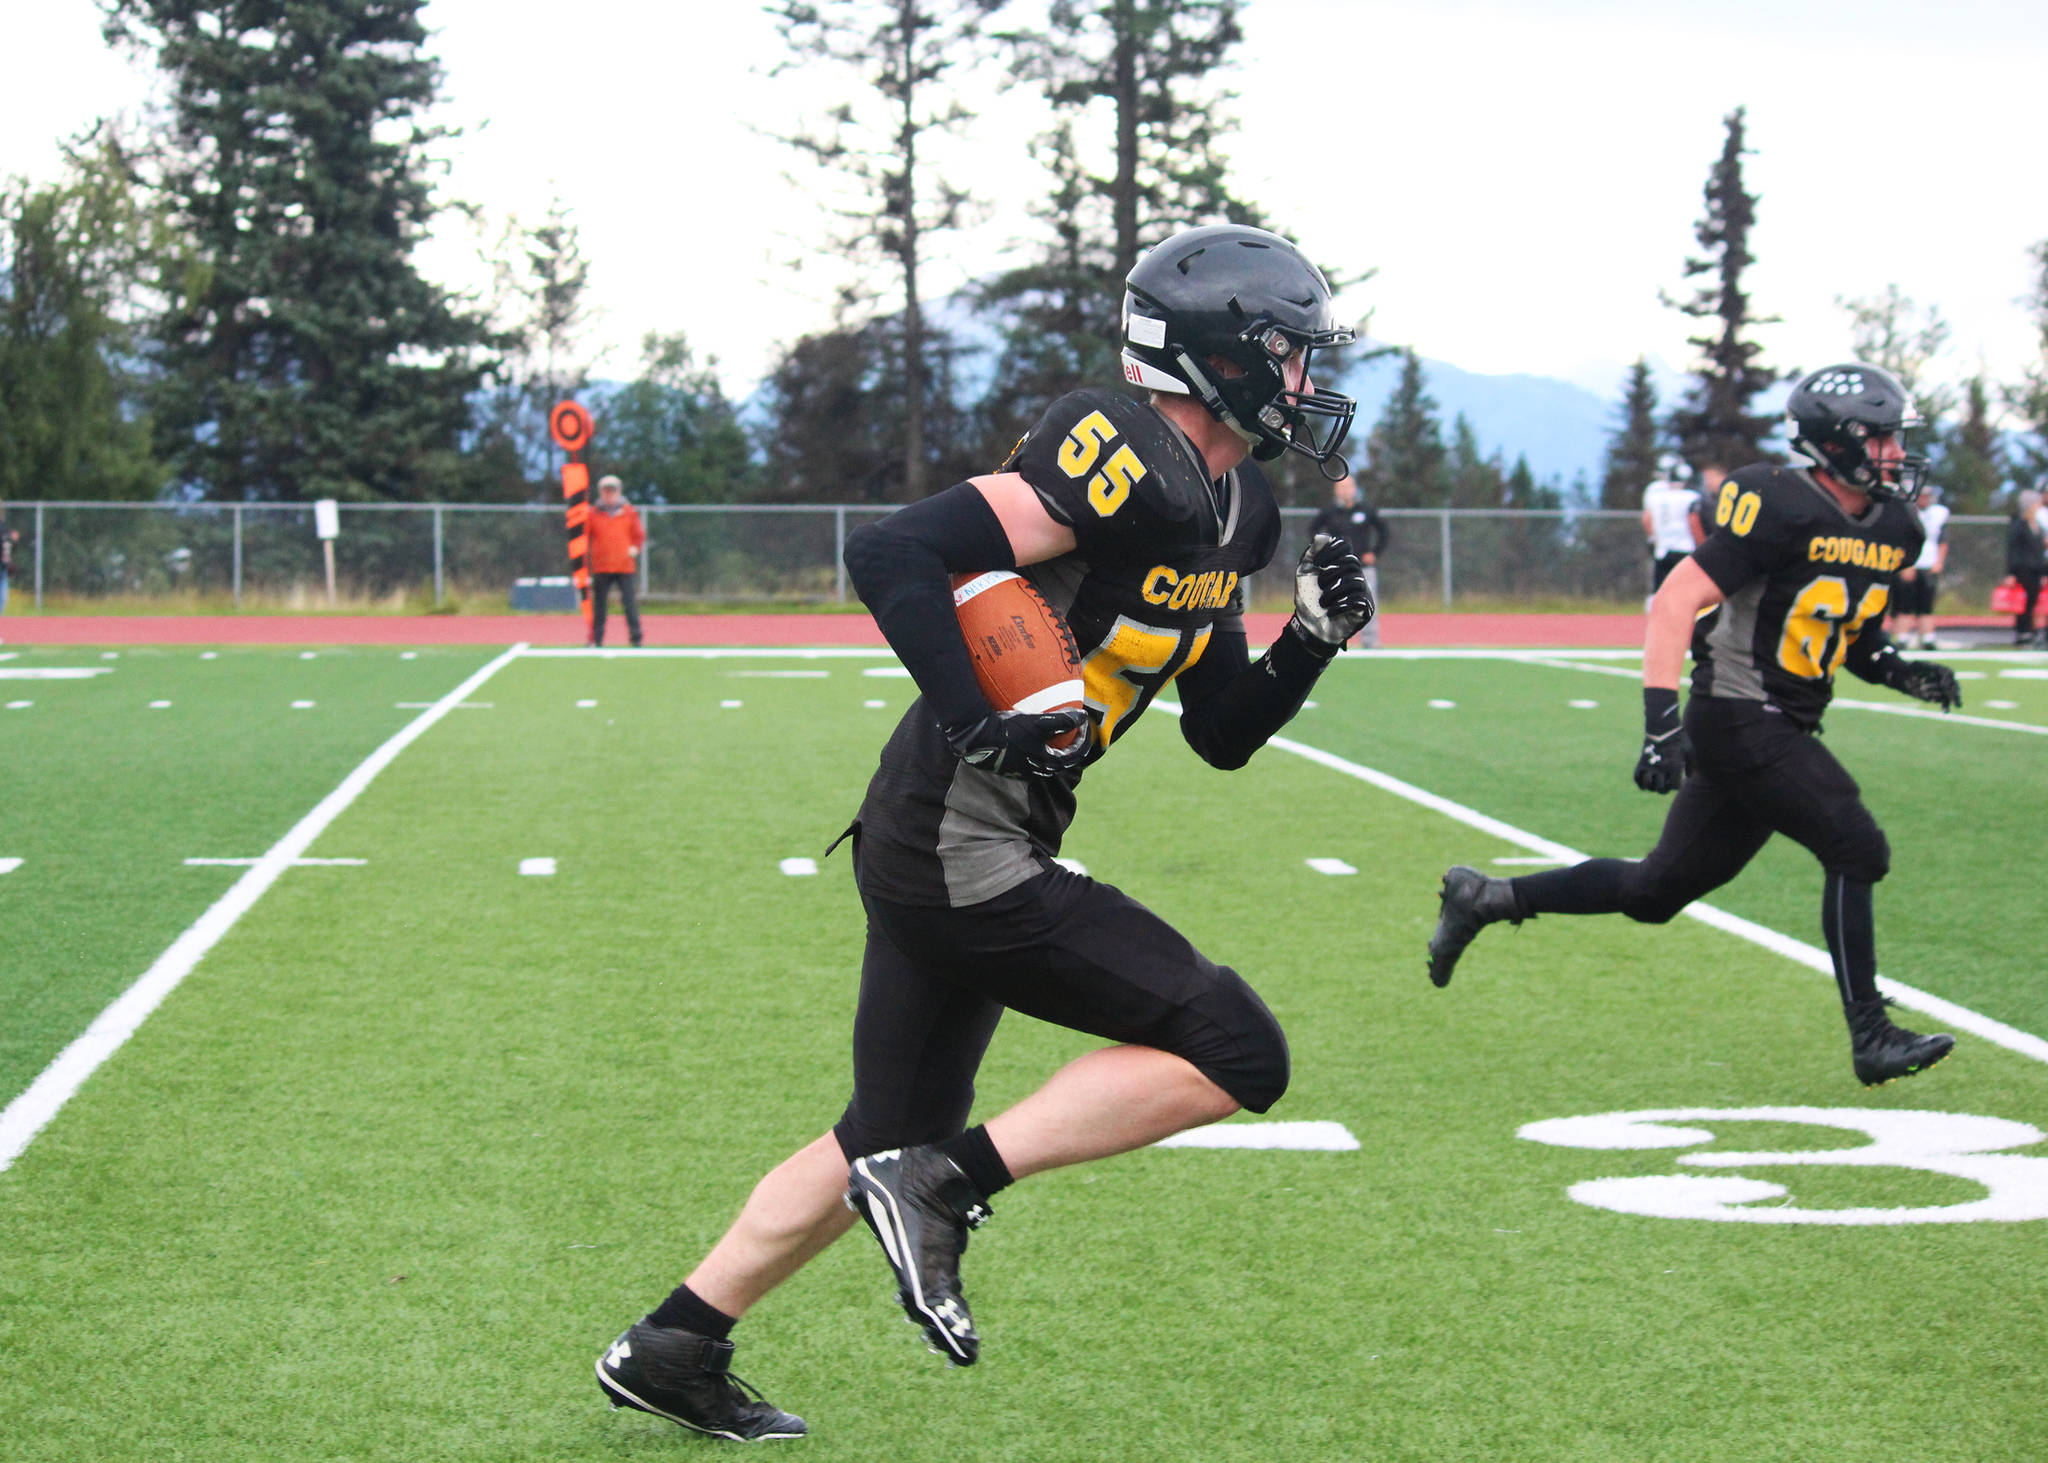 Offensive and defensive lineman Nikit Anufriev, one of two seniors on this year’s Cougar football team, runs with the ball during the Cougars’ game against Nikiski High School on Saturday, Sept. 2, 2017 in Homer, Alaska. The Cougars lost 18-40. (Photo by Megan Pacer/Homer News)